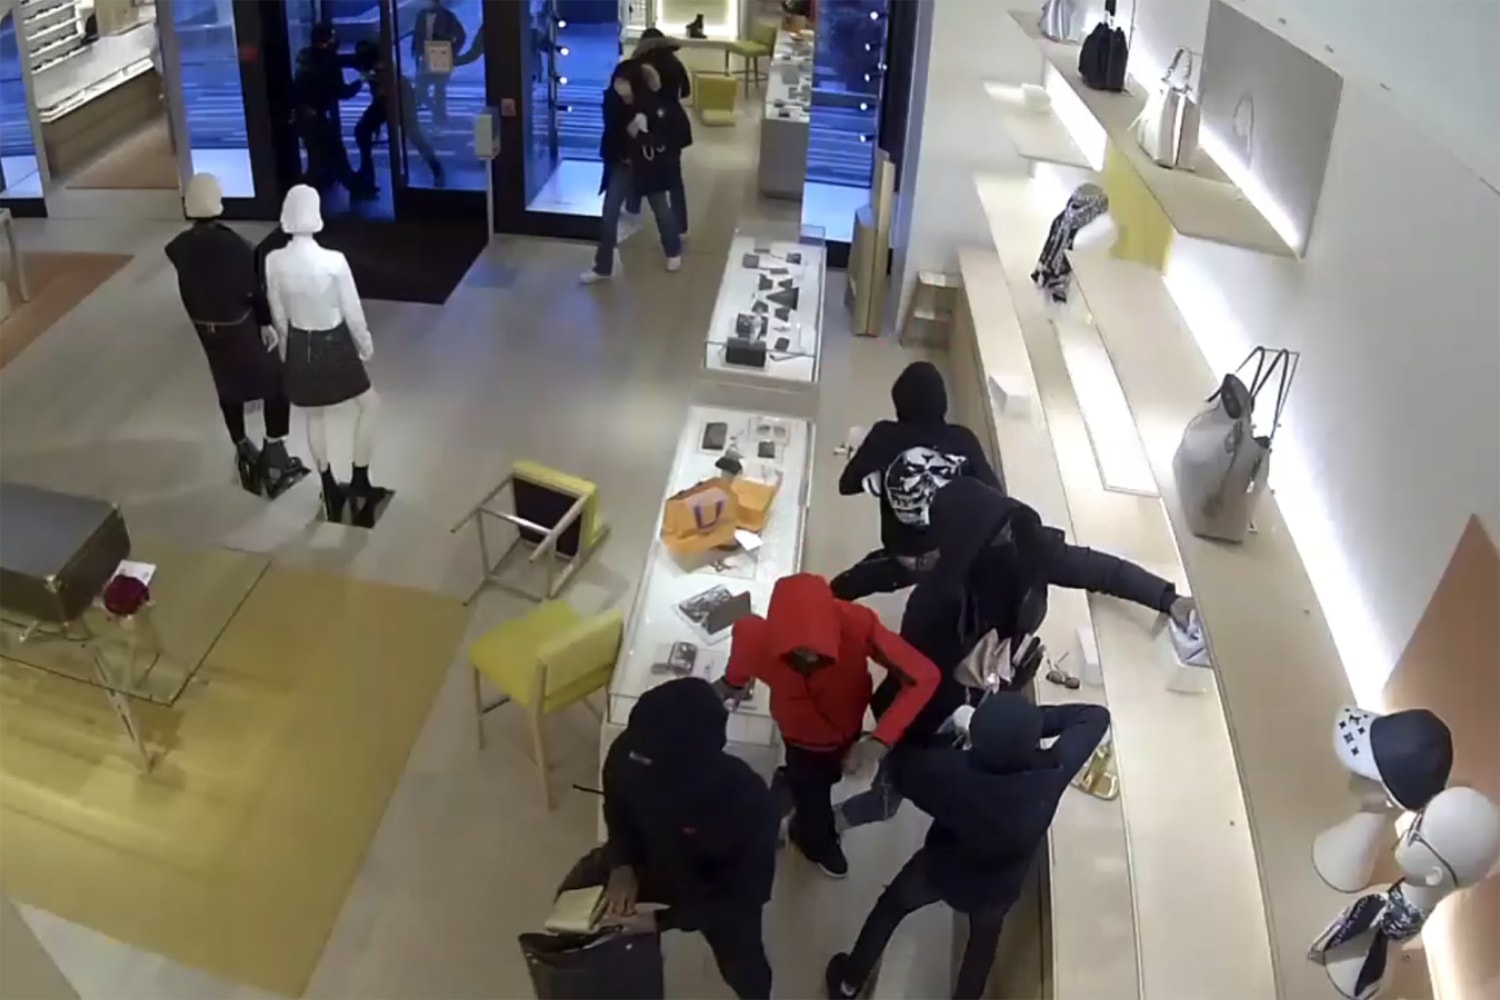 Thieves rob Los Angeles Nordstrom store in latest coordinated raid, California